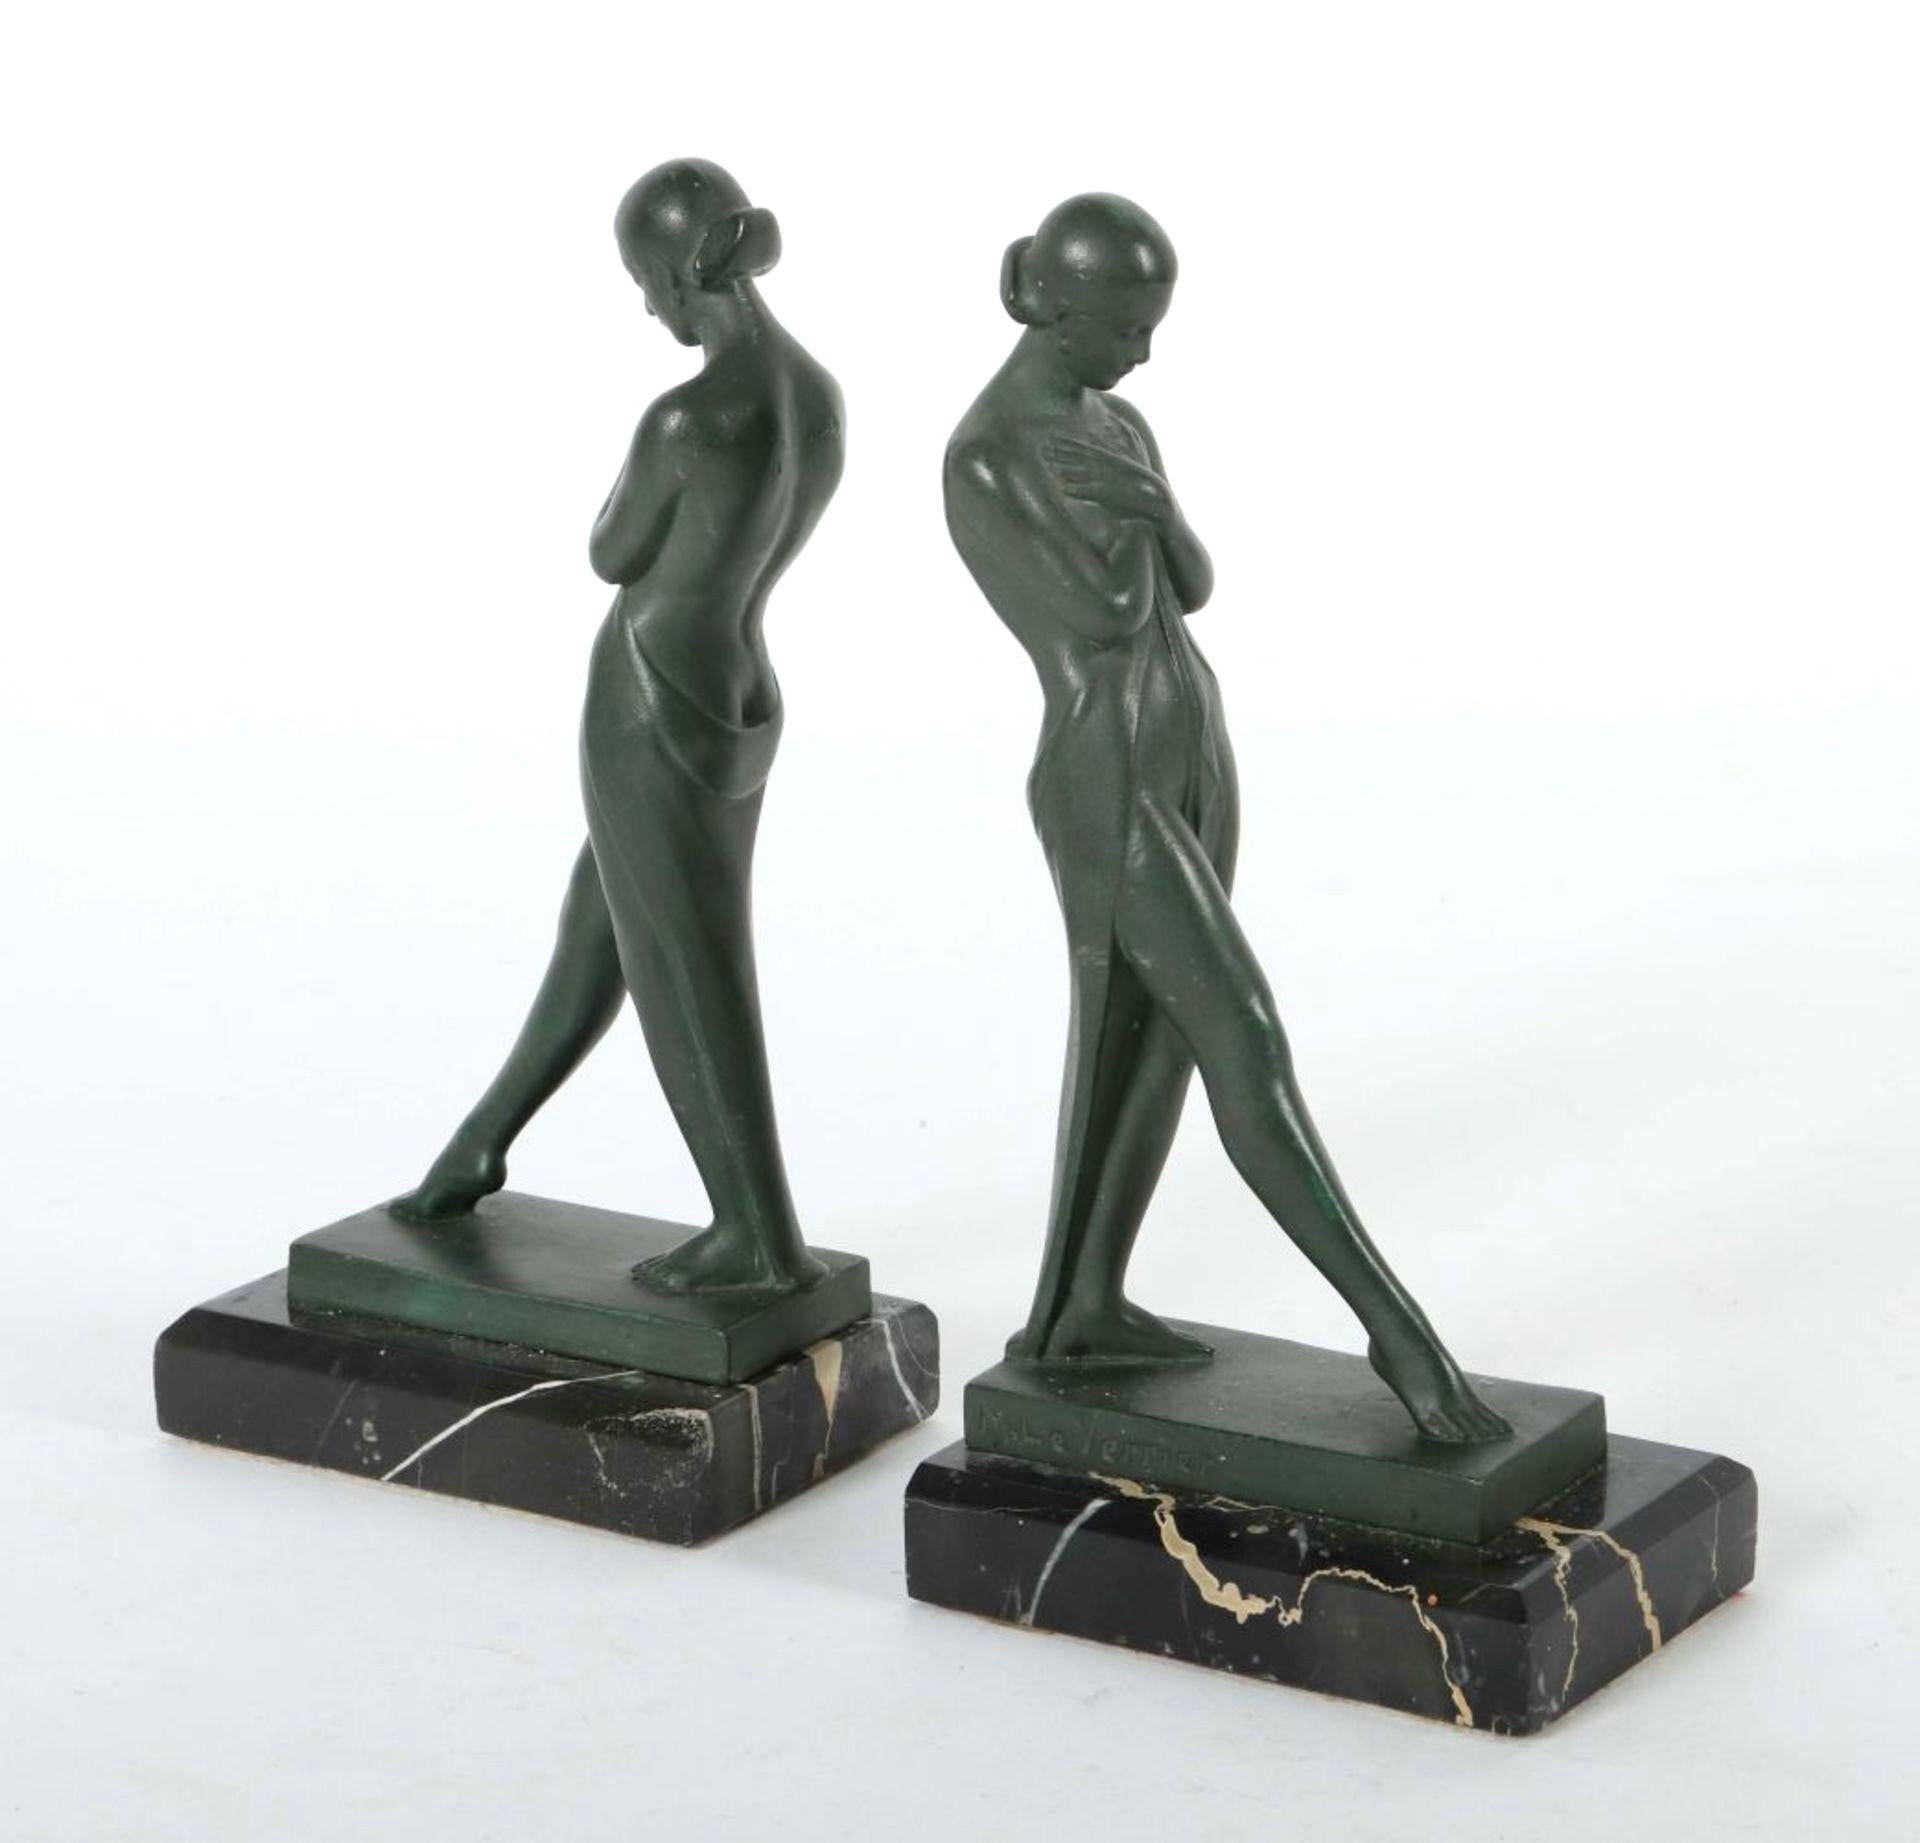 “Meditation”
Designed in France during the roaring 1920s by “Fayral”, which is one of the pseudonyms from “Pierre Le Faguays” (1892-1962), signed.
Original “Max Le Verrier”
Original Art Deco, France, 1920/30s 

Bookends made in “Régule”